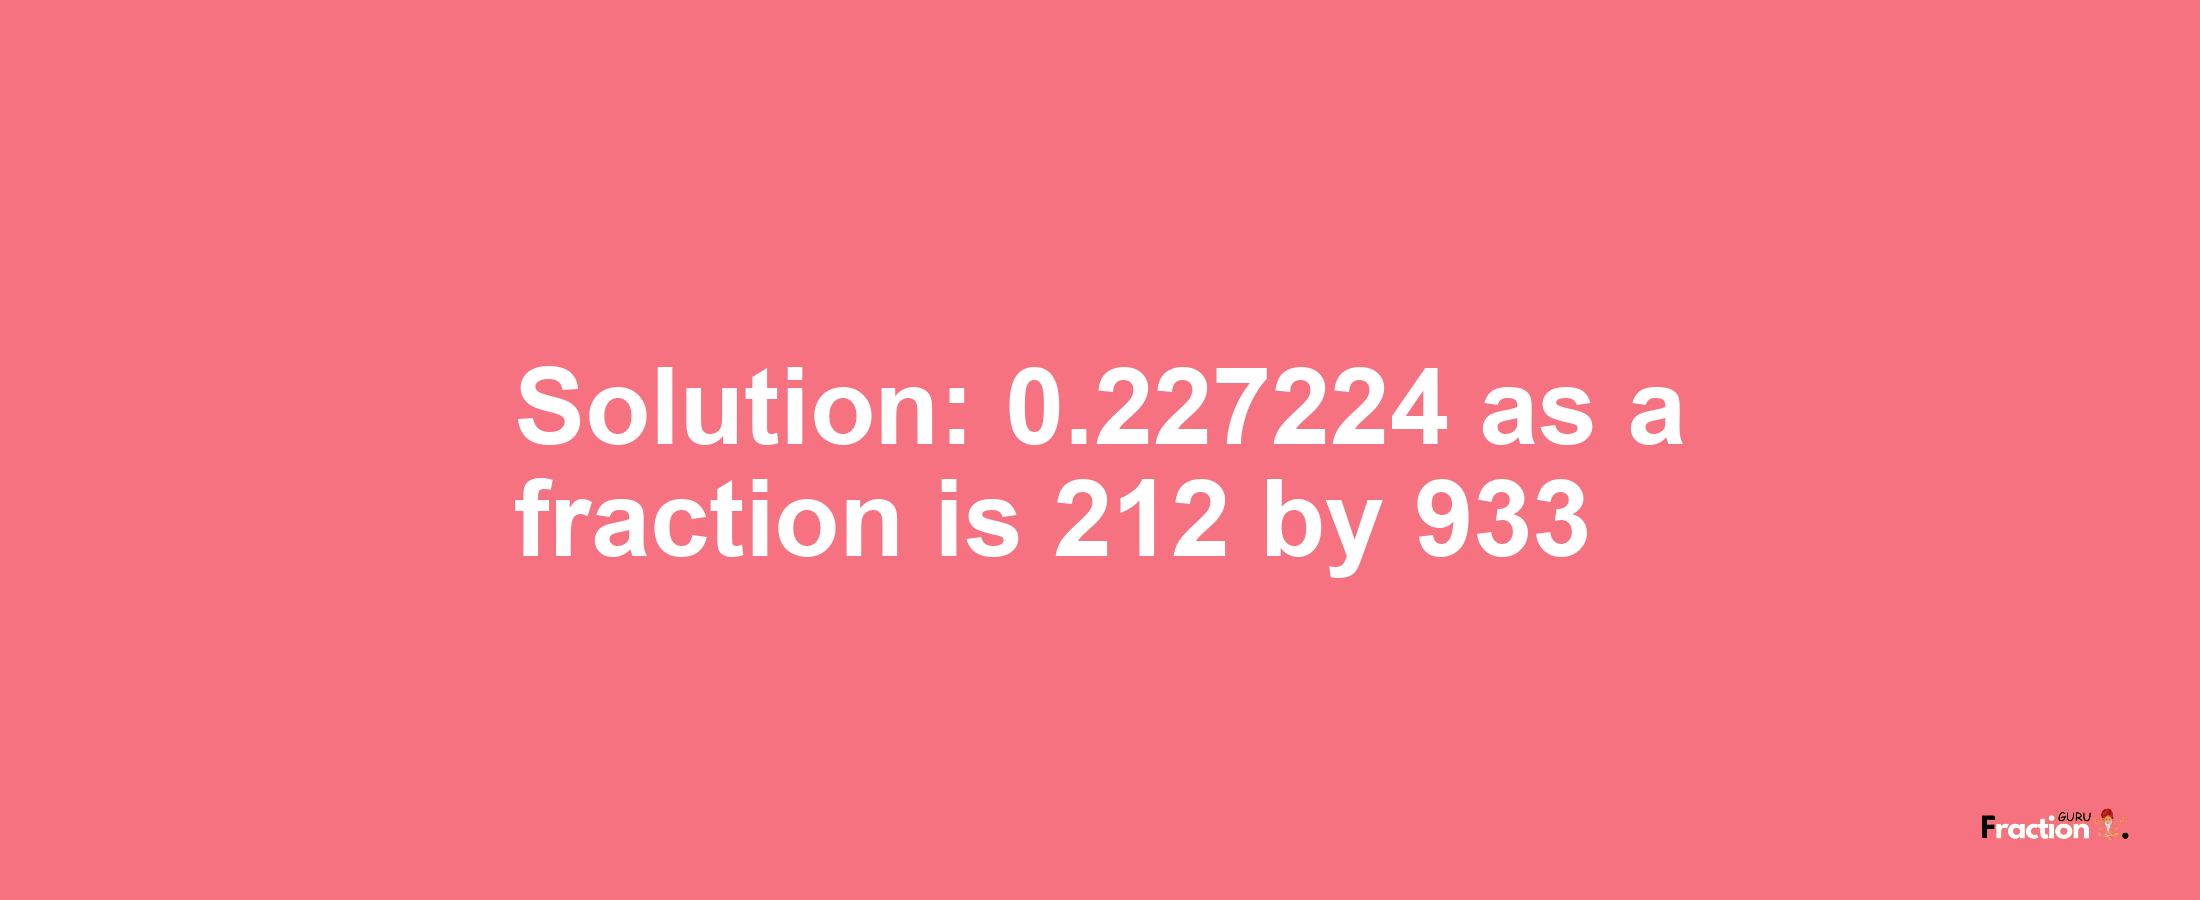 Solution:0.227224 as a fraction is 212/933